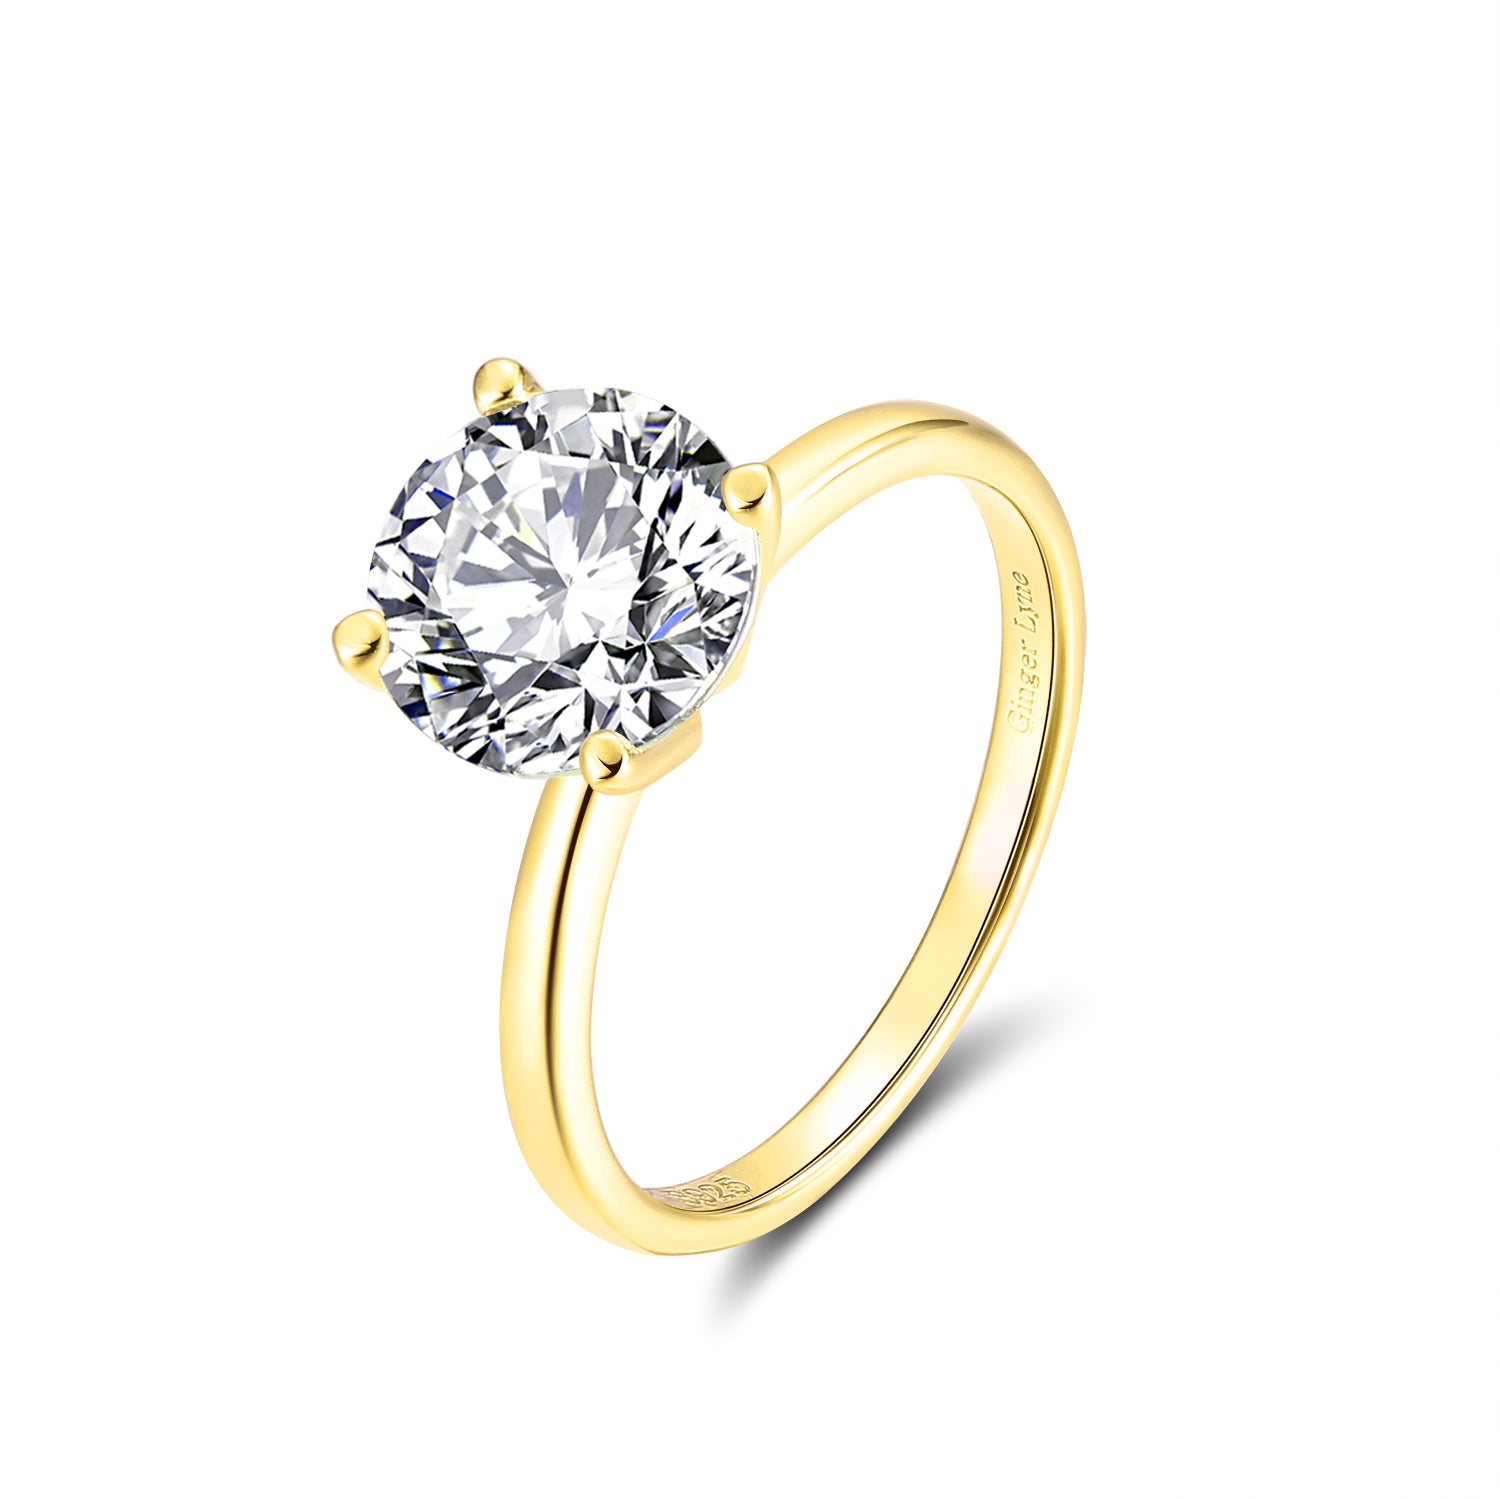 Amore Engagement Ring Women Gold Sterling Silver 2Ct Topaz Ginger Lyne Collection - Gold 2Carat,8